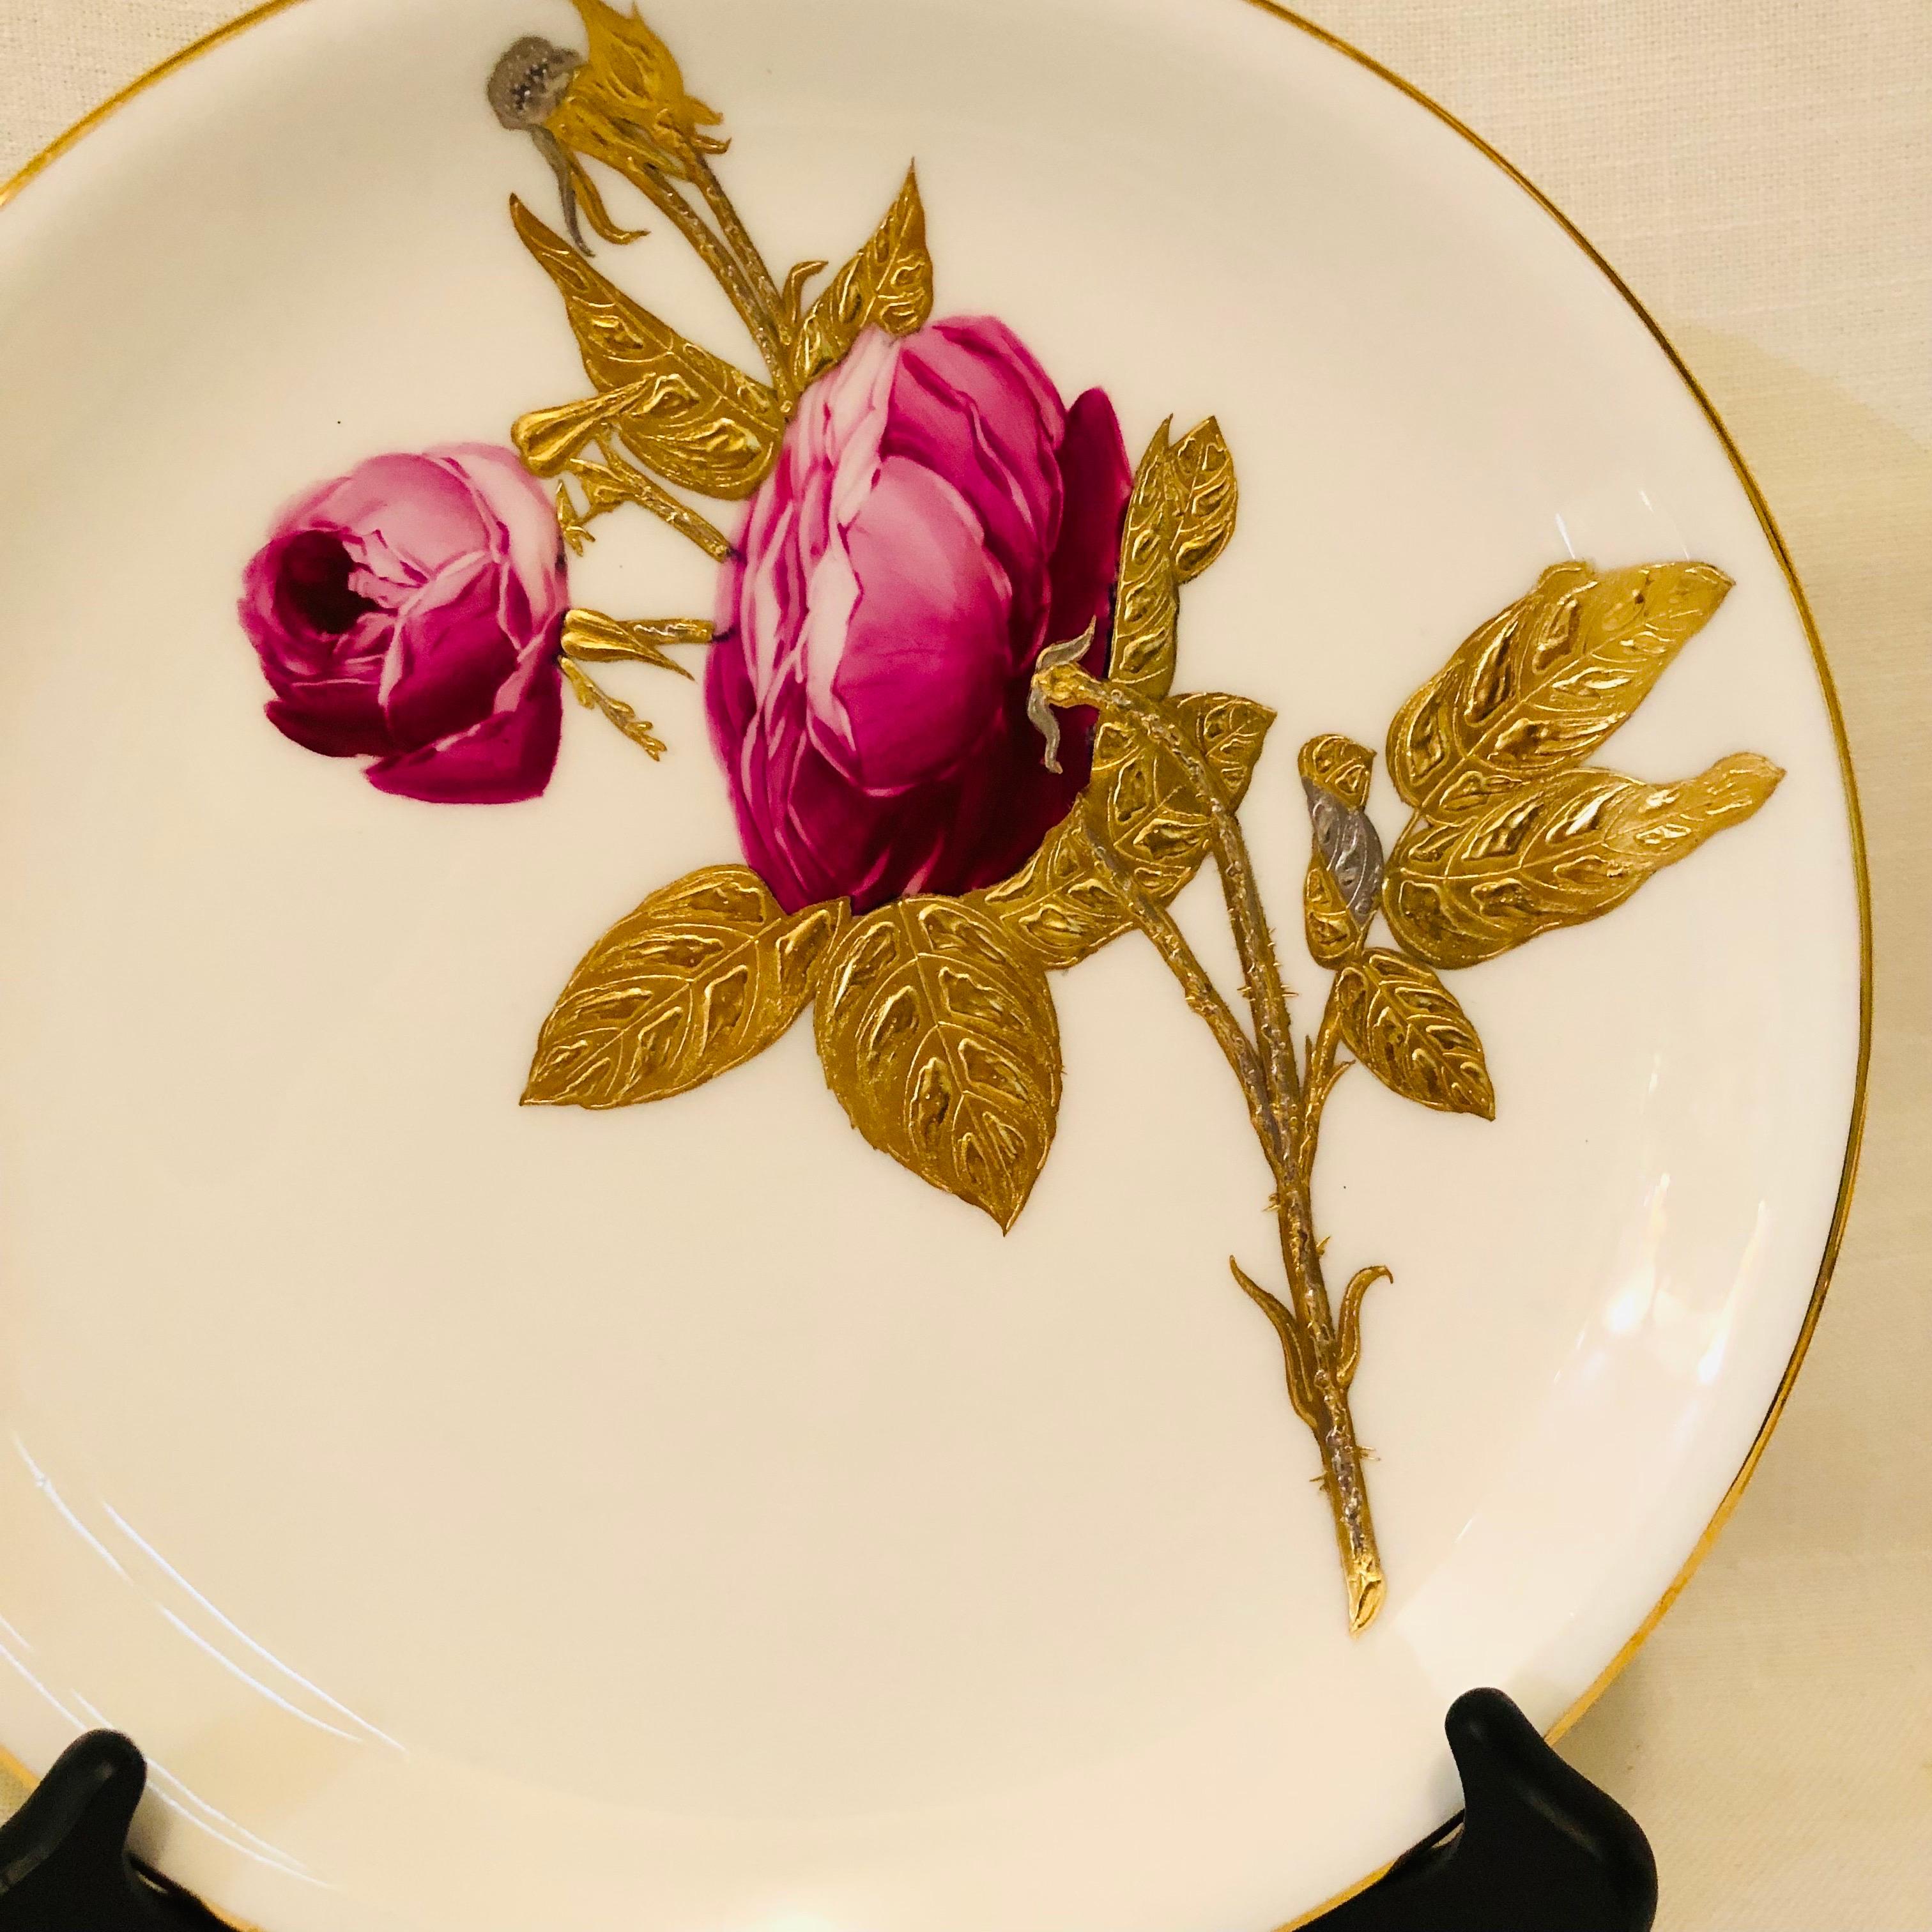 Minton Plates Each Painted With a Different Rose With Gold and Platinum Accents 3